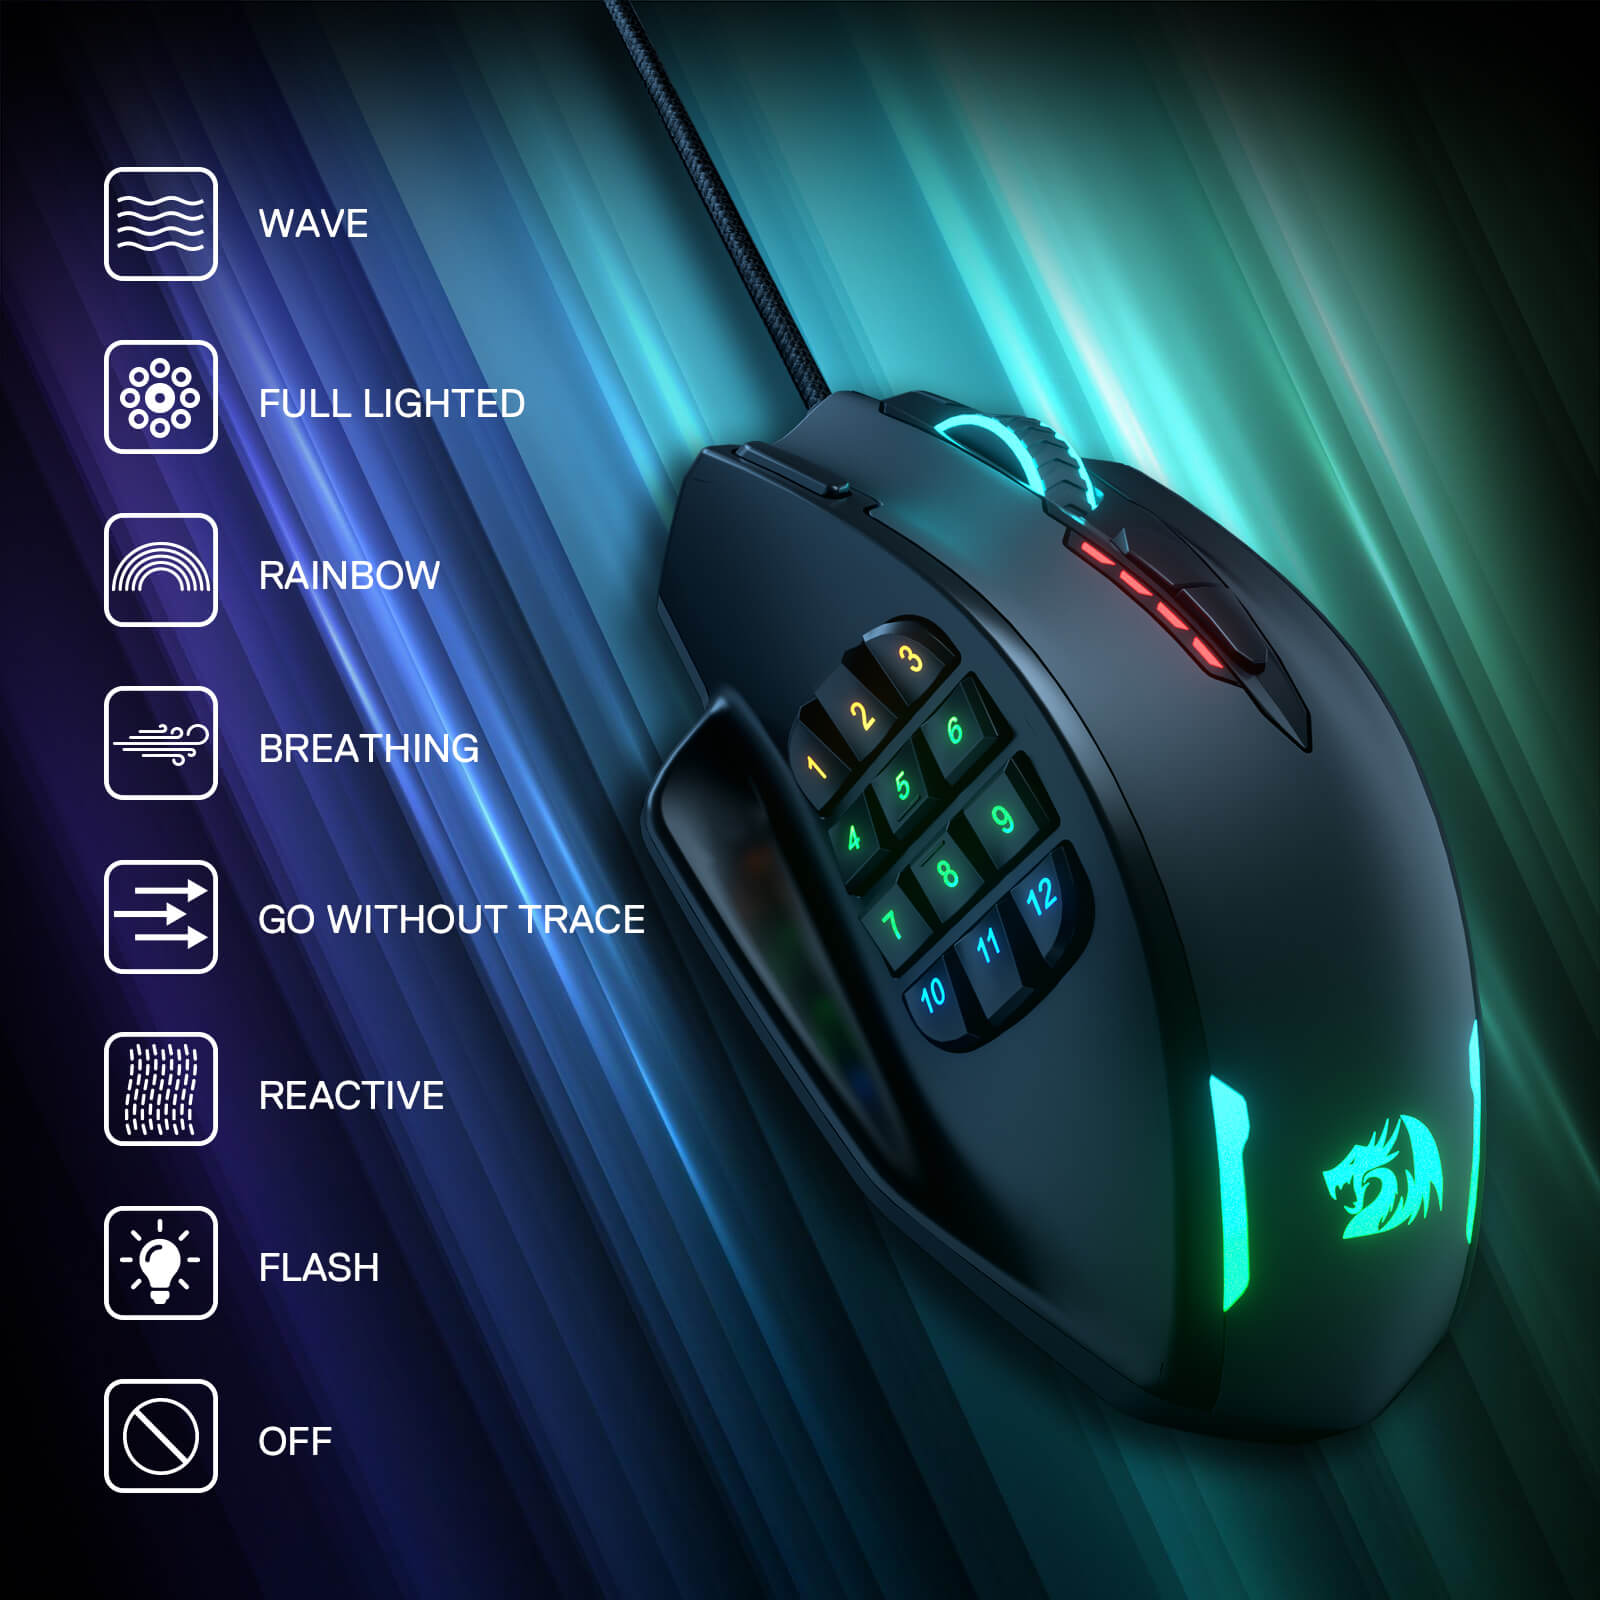 Redragon Impact M908 RGB MMO Laser Wired Gaming Mouse